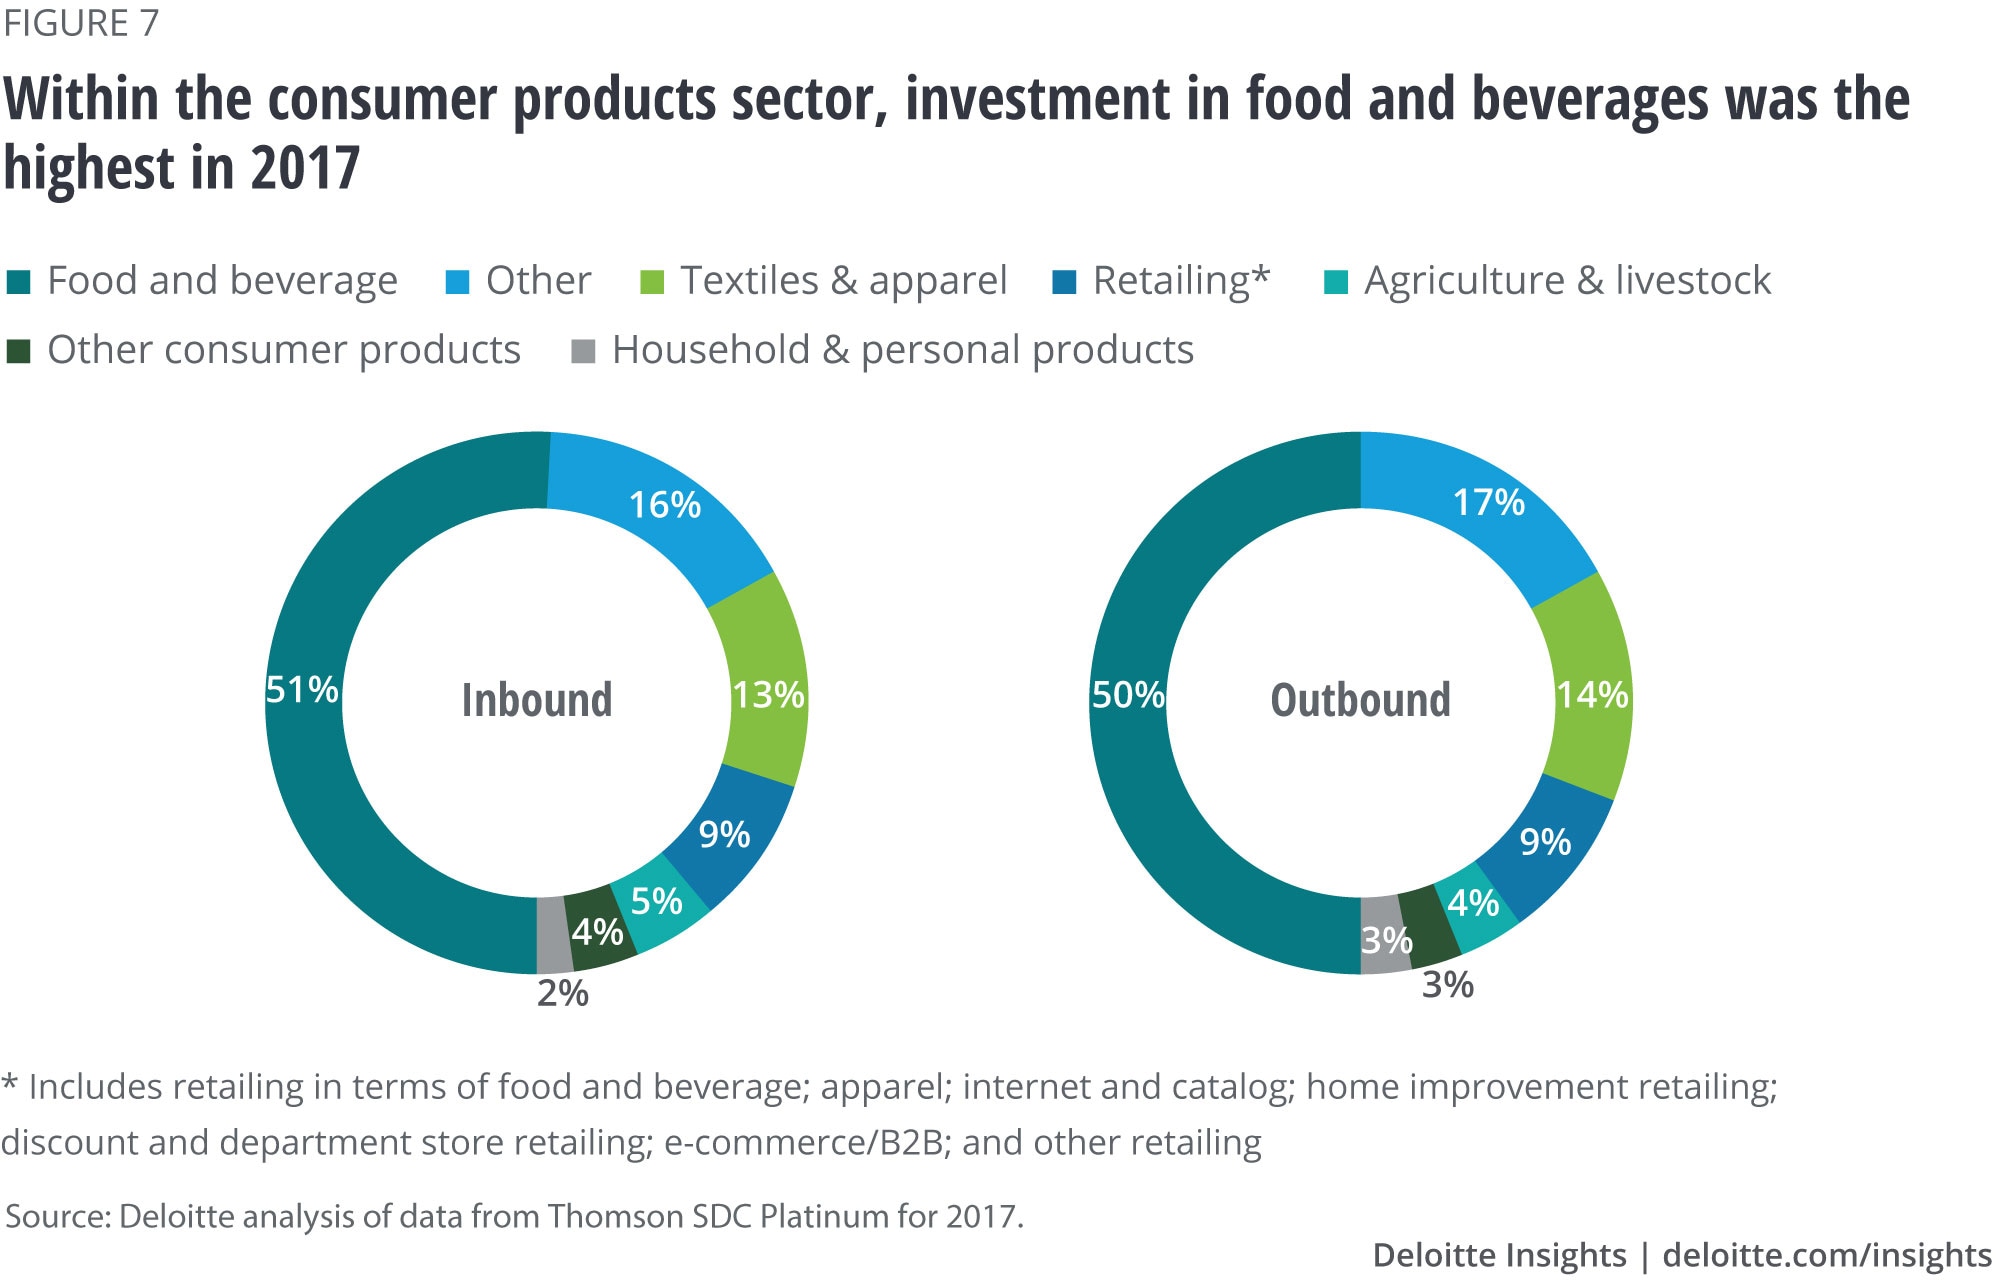 Within the consumer products sector, investment in food and beverages was the highest in 2017